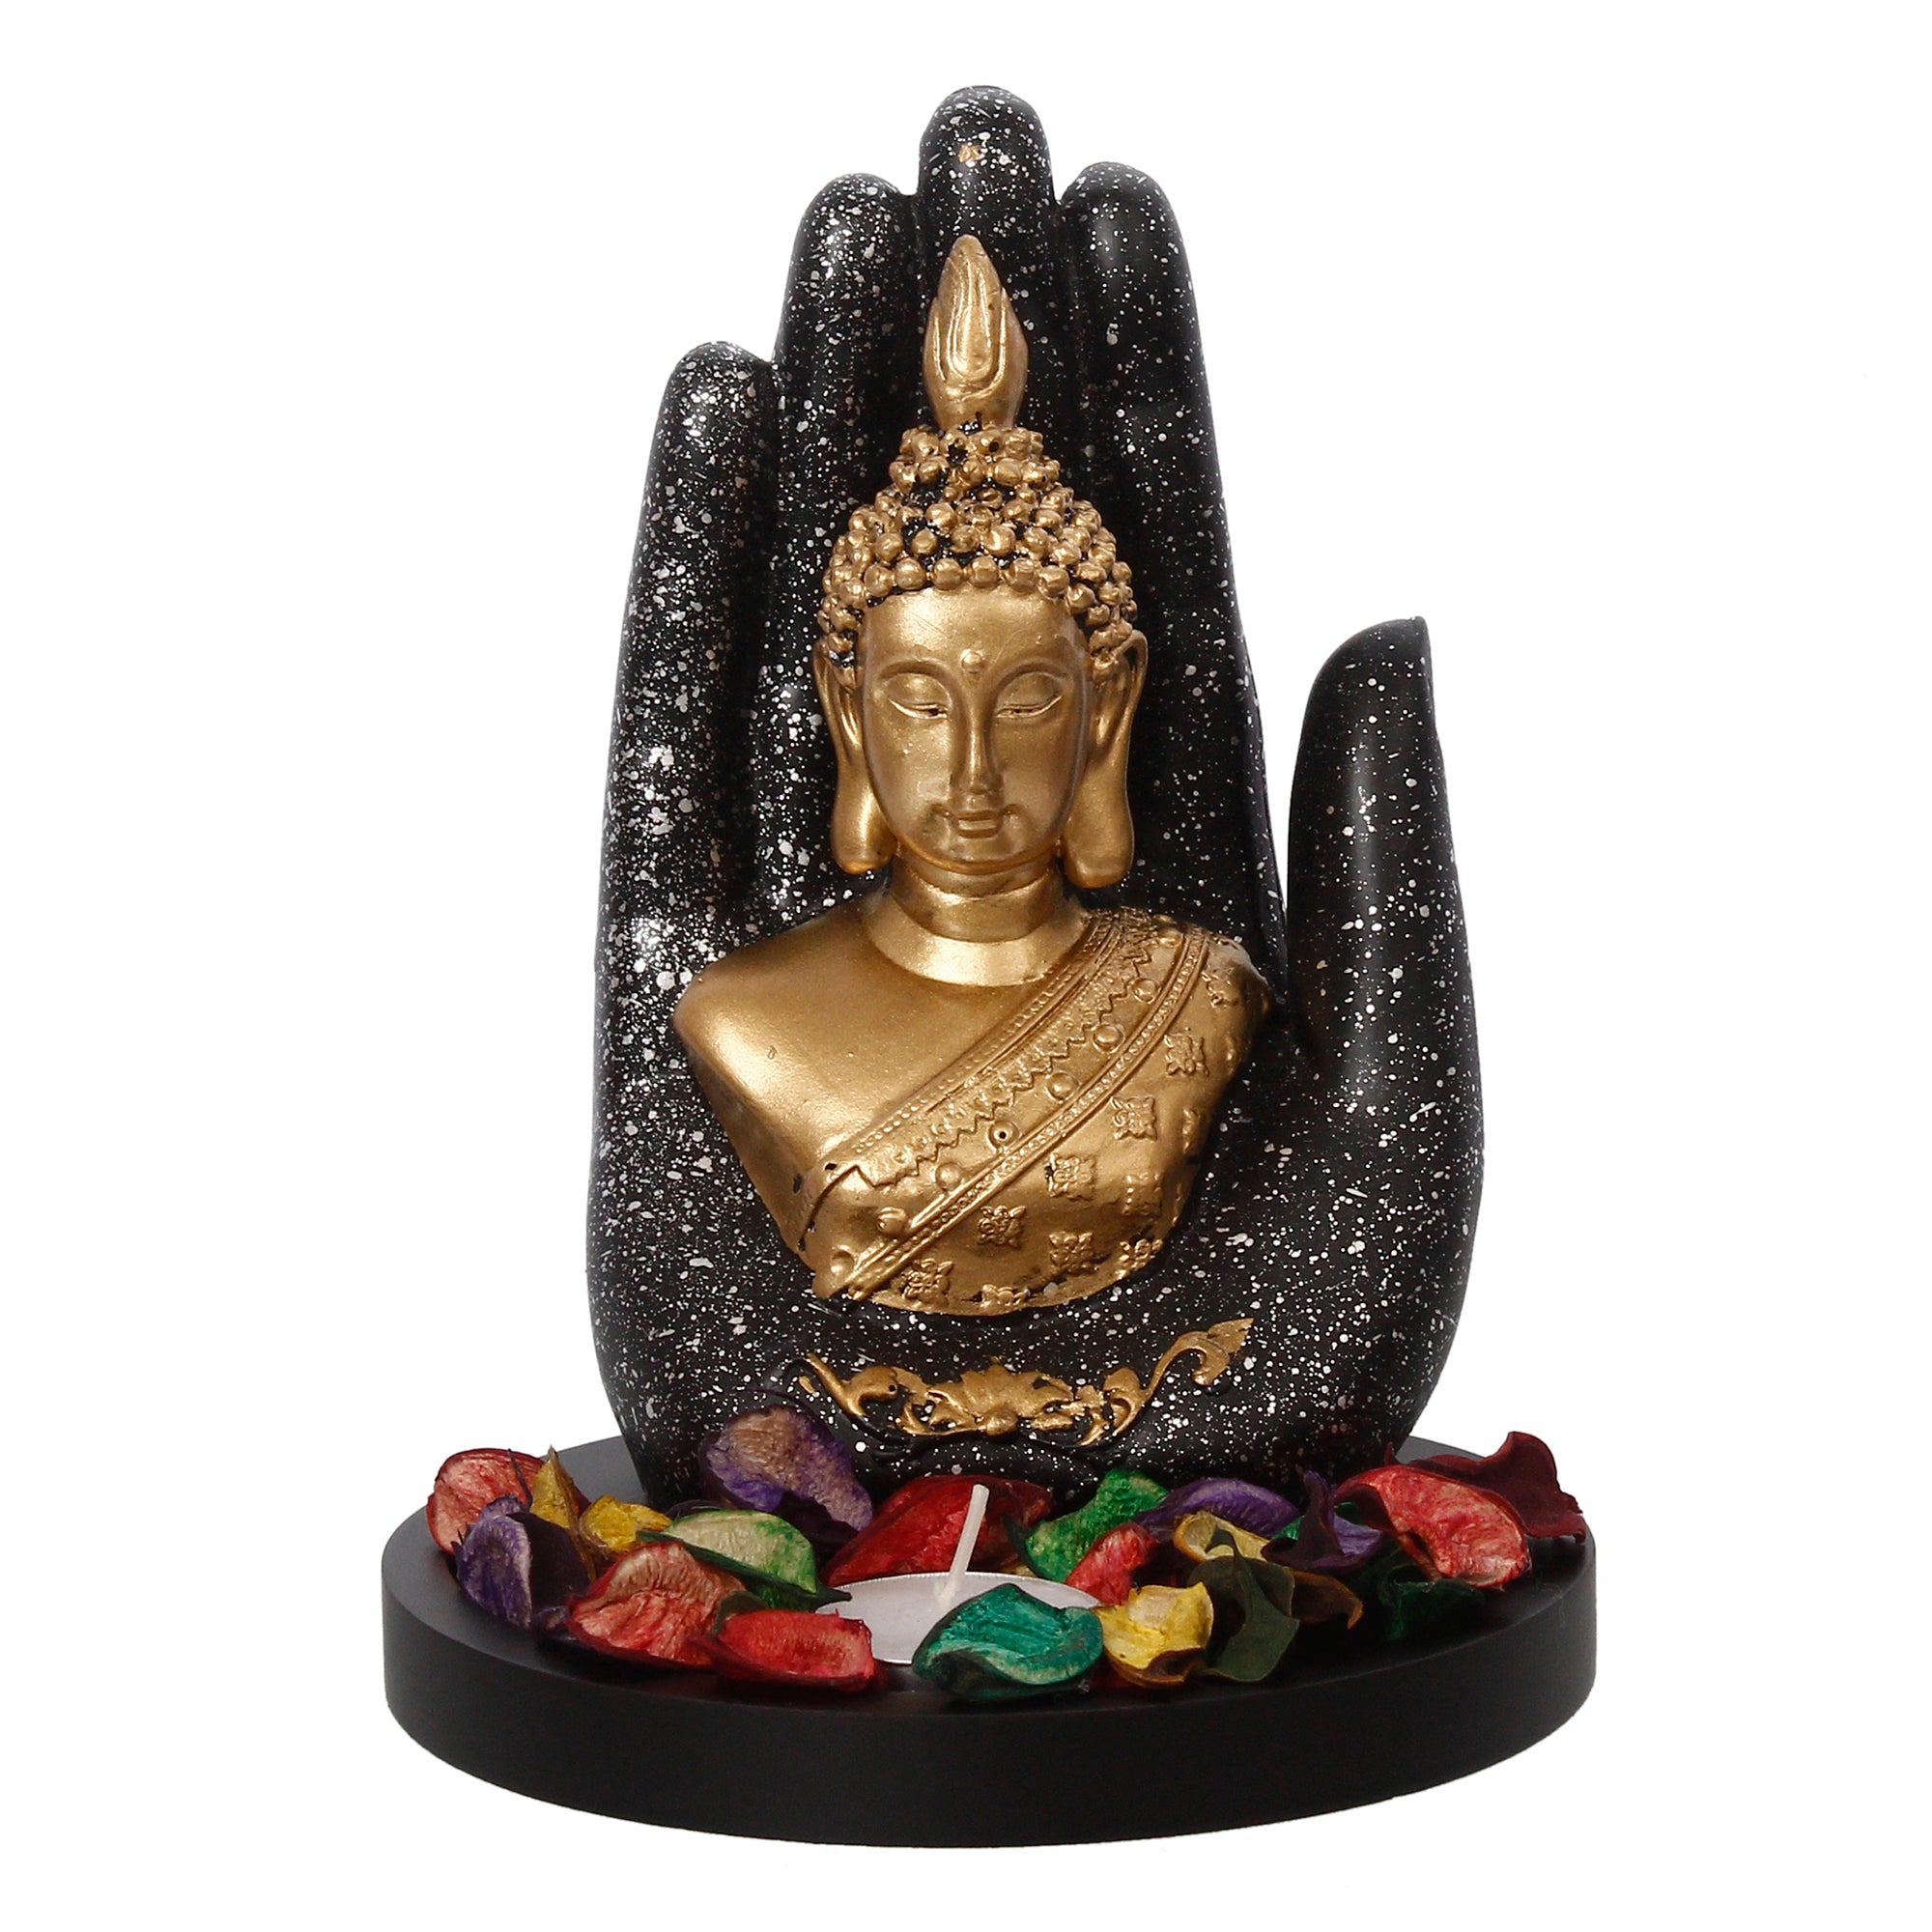 Polyresin Black and Golden Handcrafted Palm Buddha Statue with Wooden Base, Fragranced Petals and Tealight 2